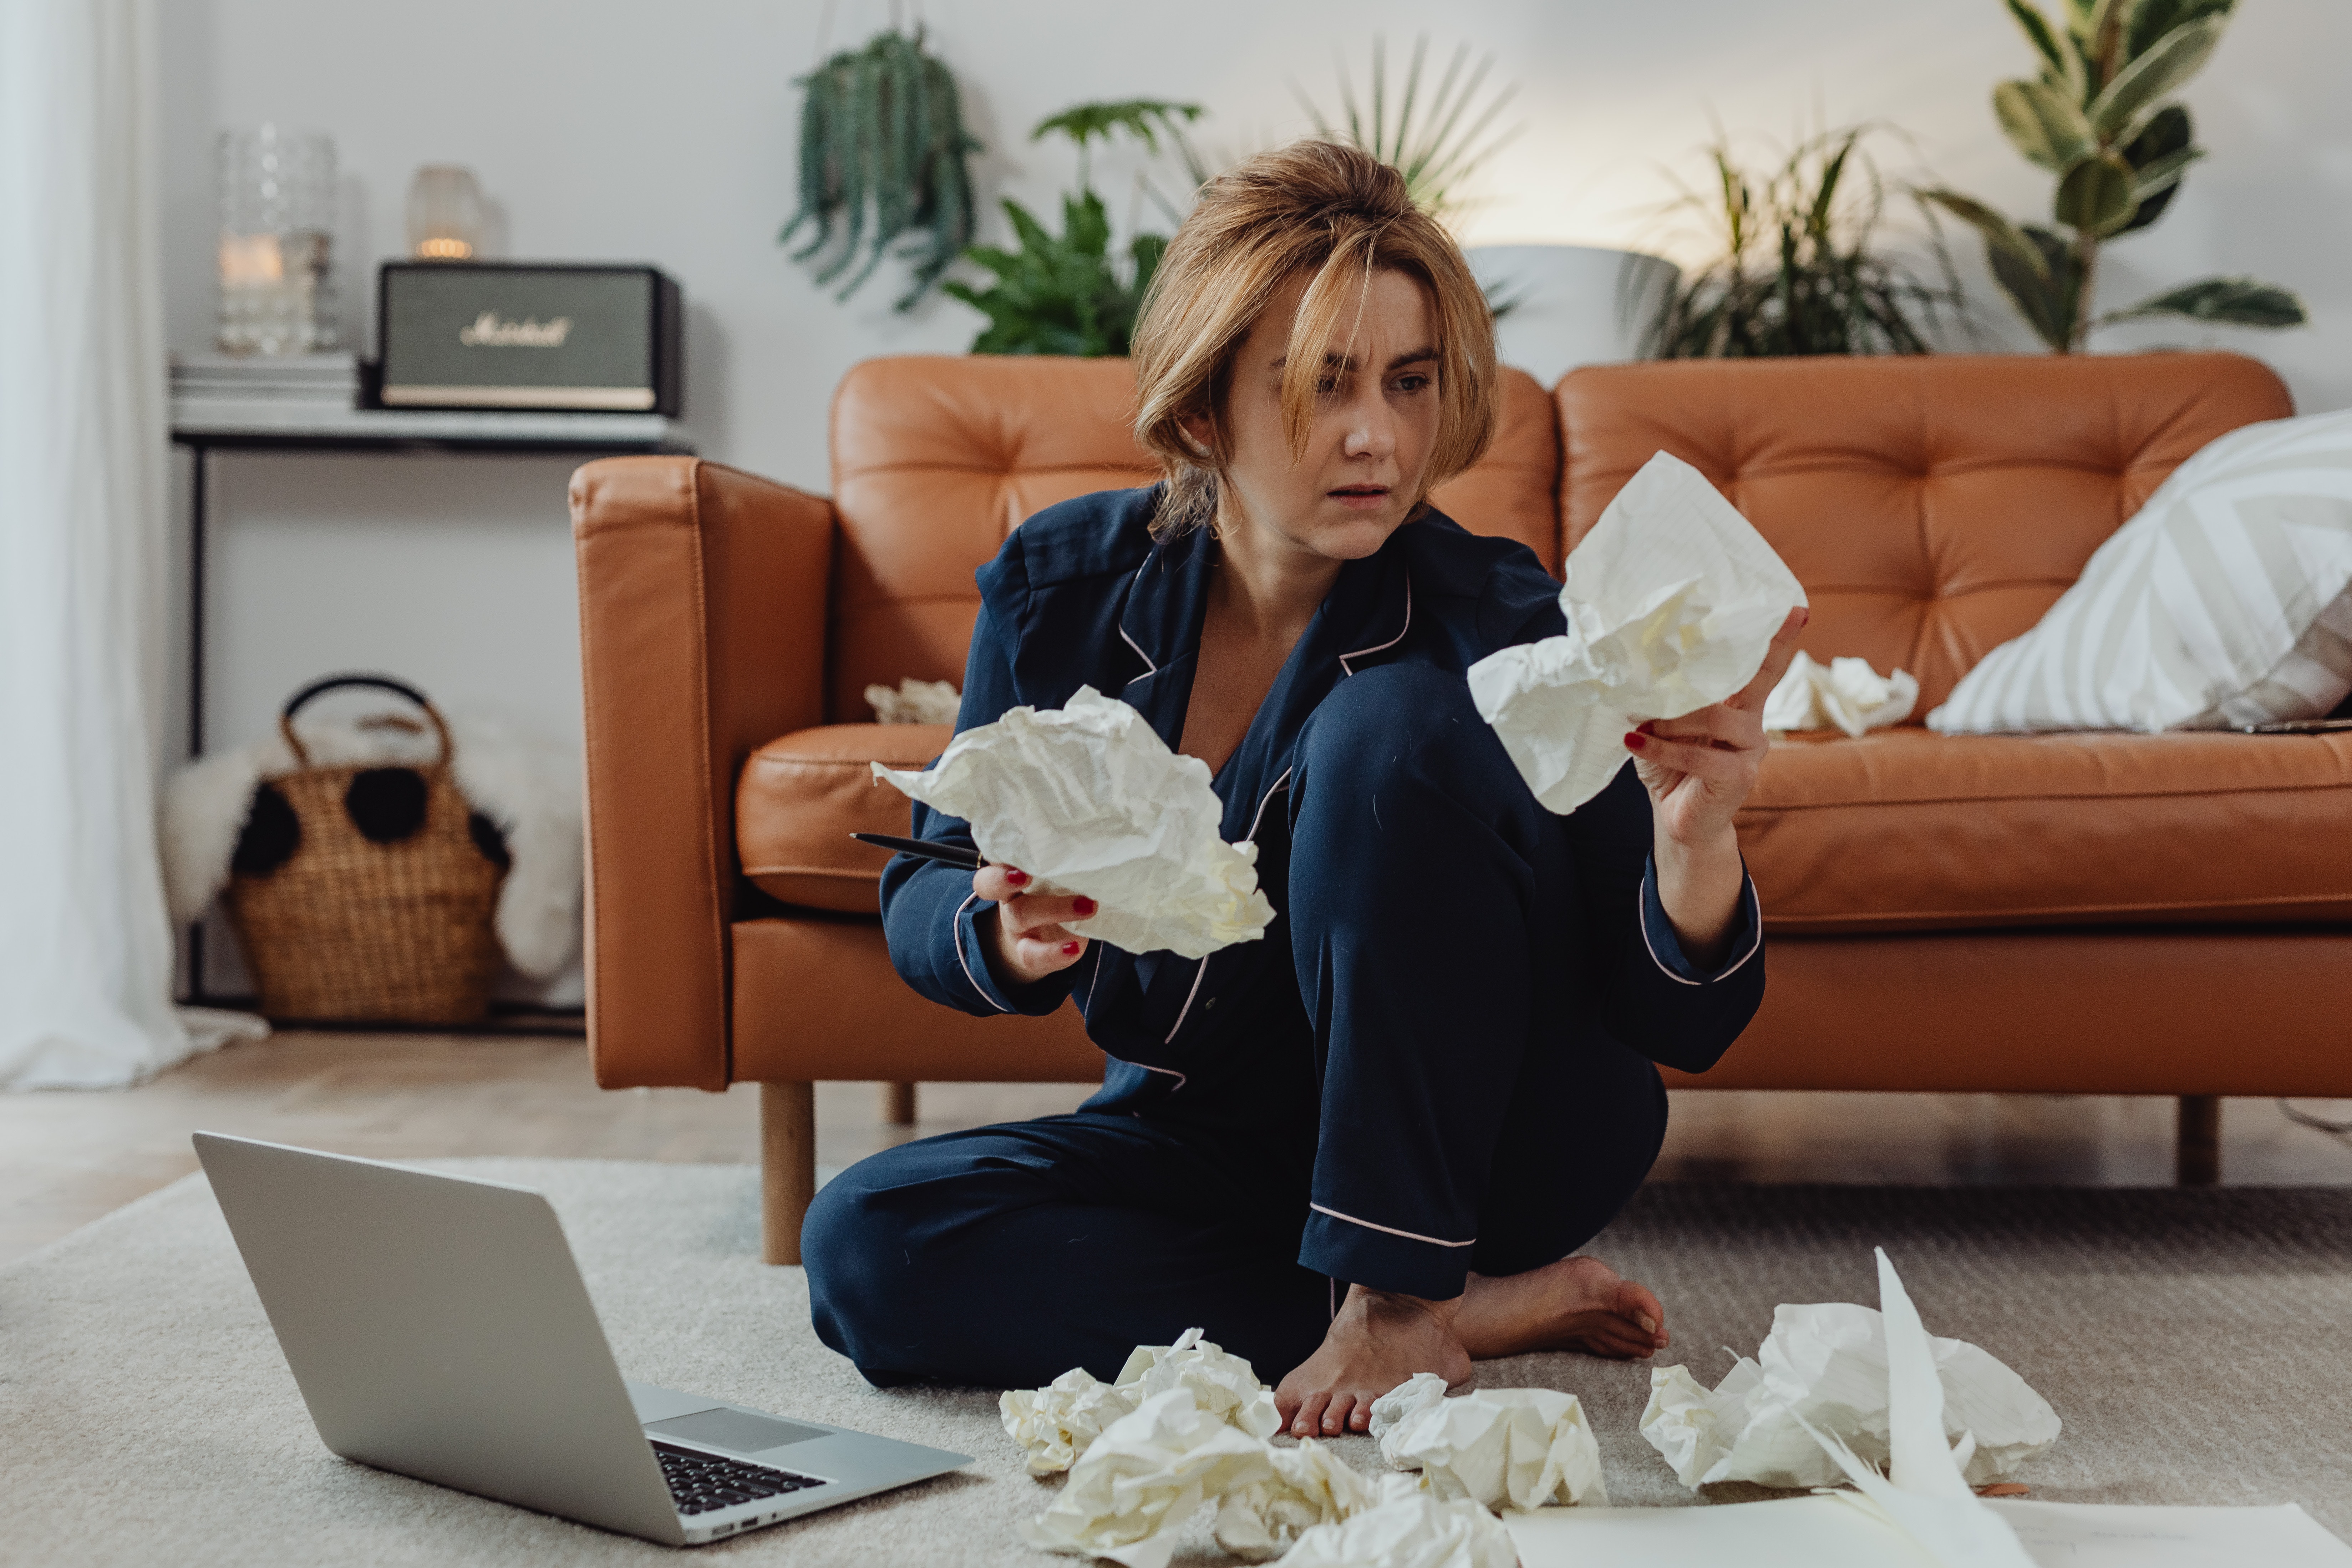 frustrated woman with laptop and crumpled paper sitting on floor in front of couch